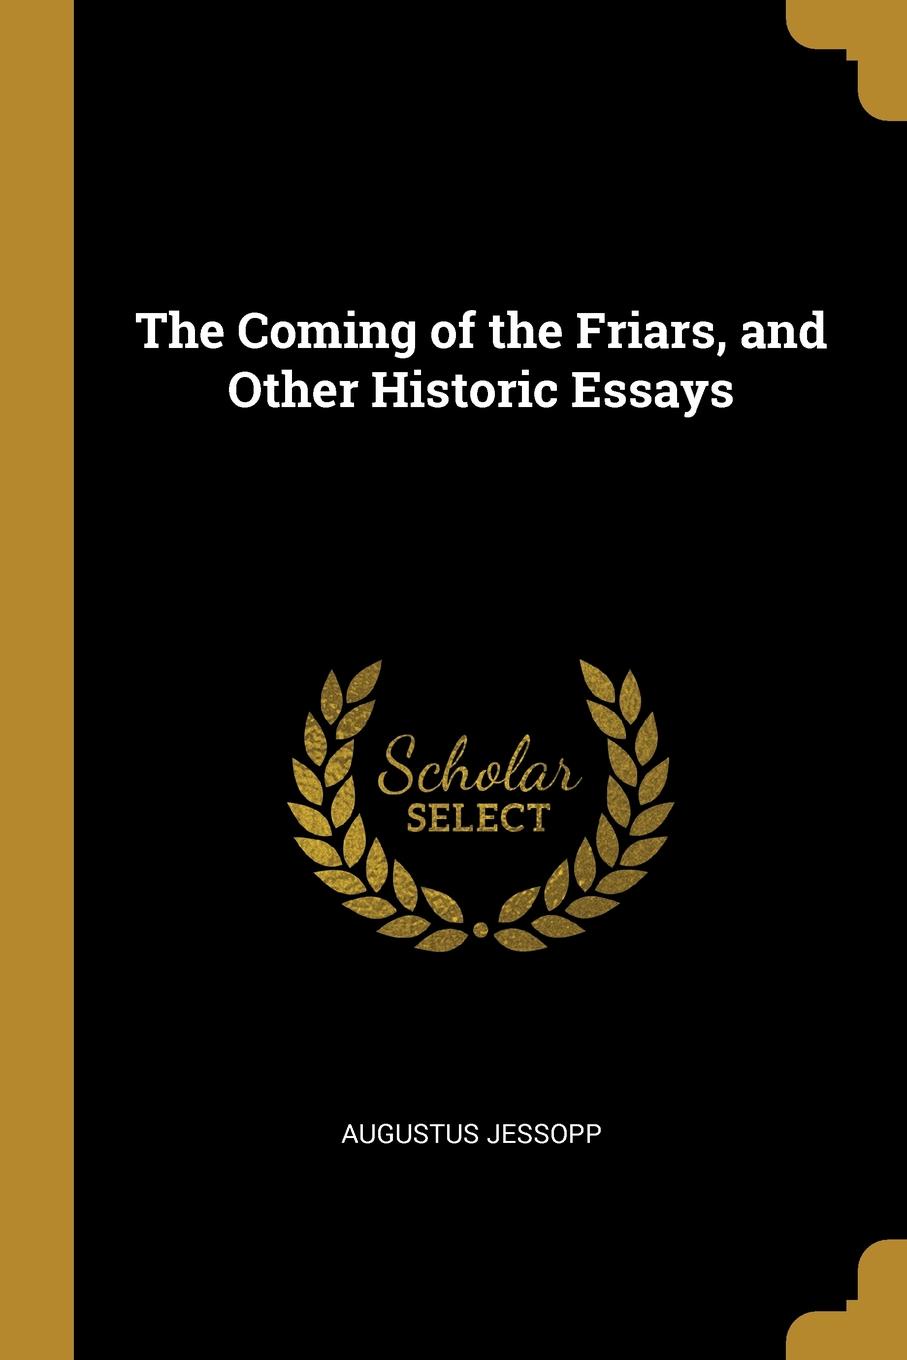 The Coming of the Friars, and Other Historic Essays